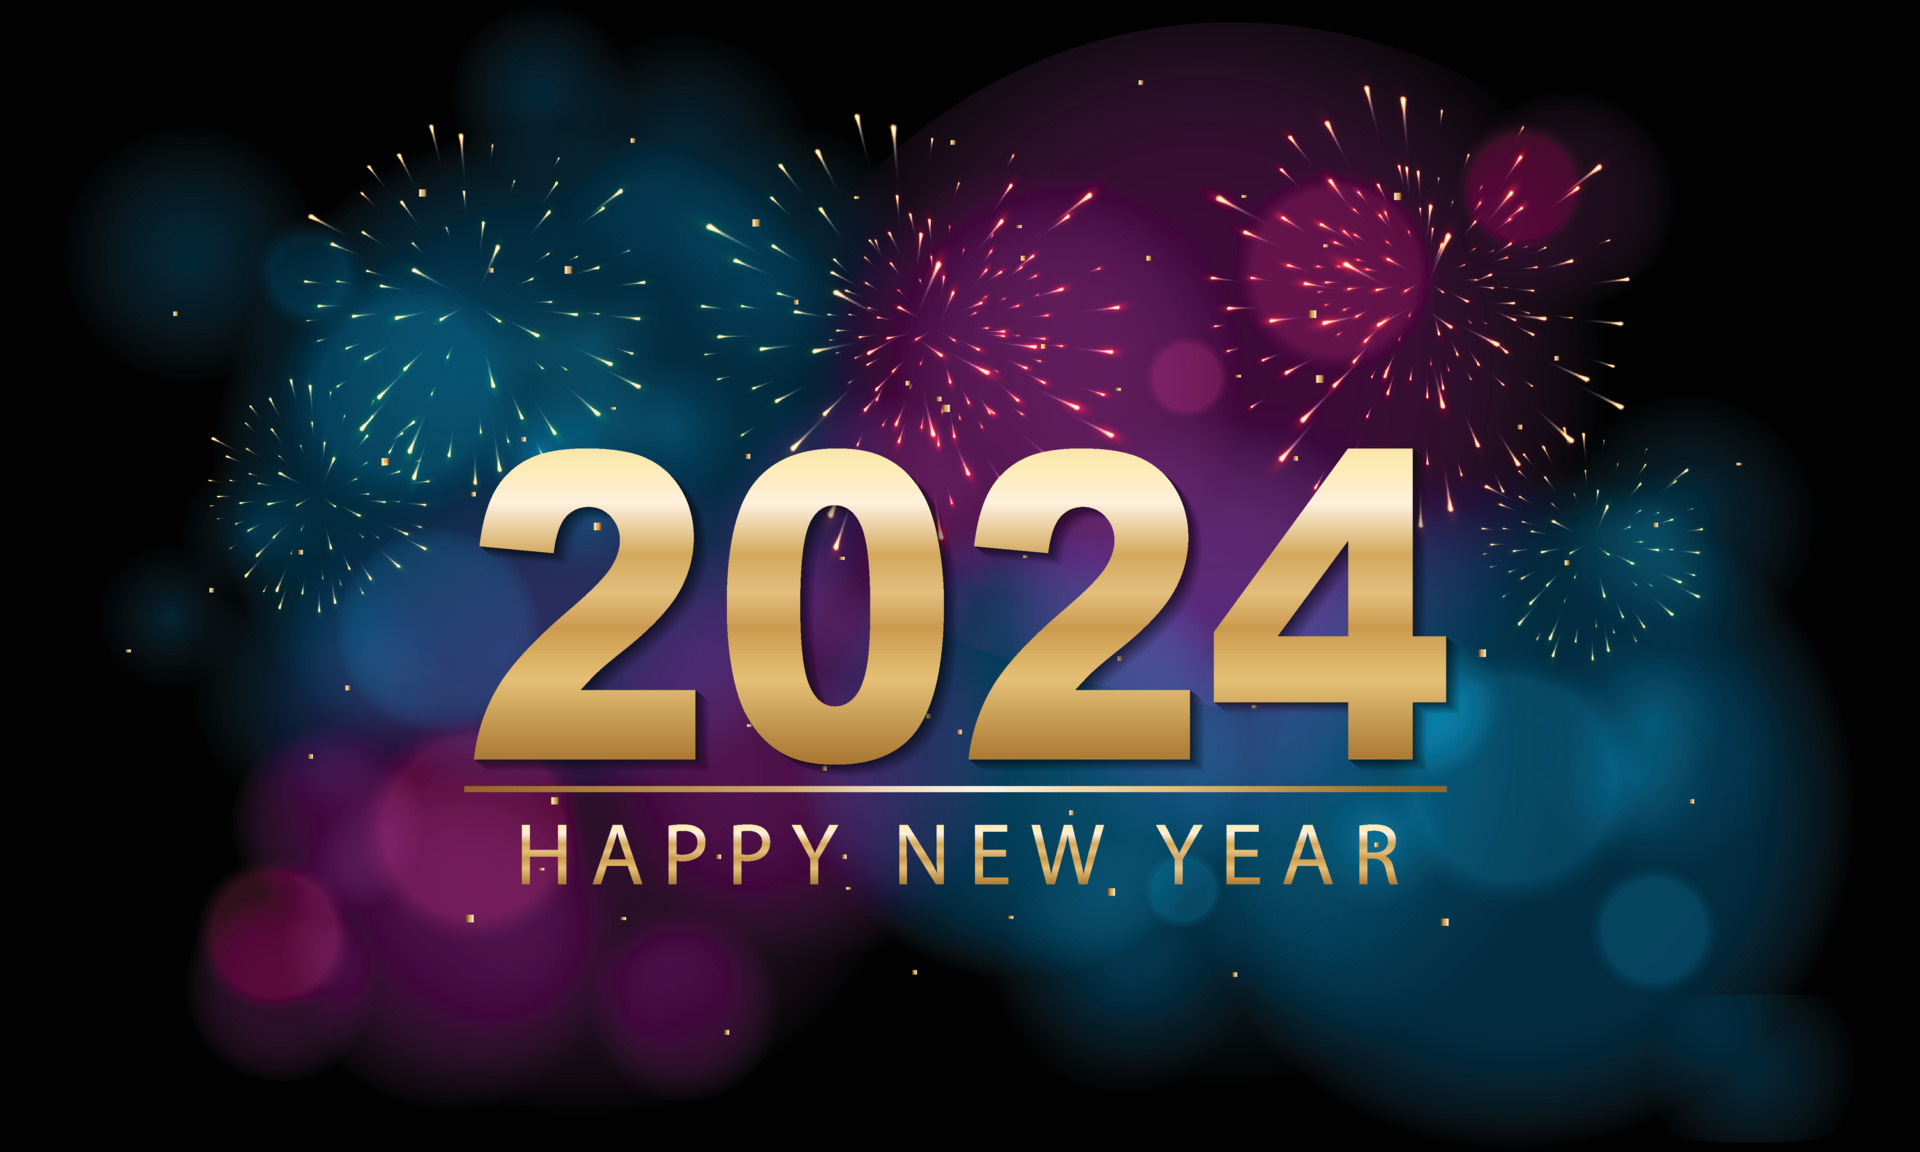 2024-happy-new-year-background-design-greeting-card-banner-poster-illustration-vector.jpg